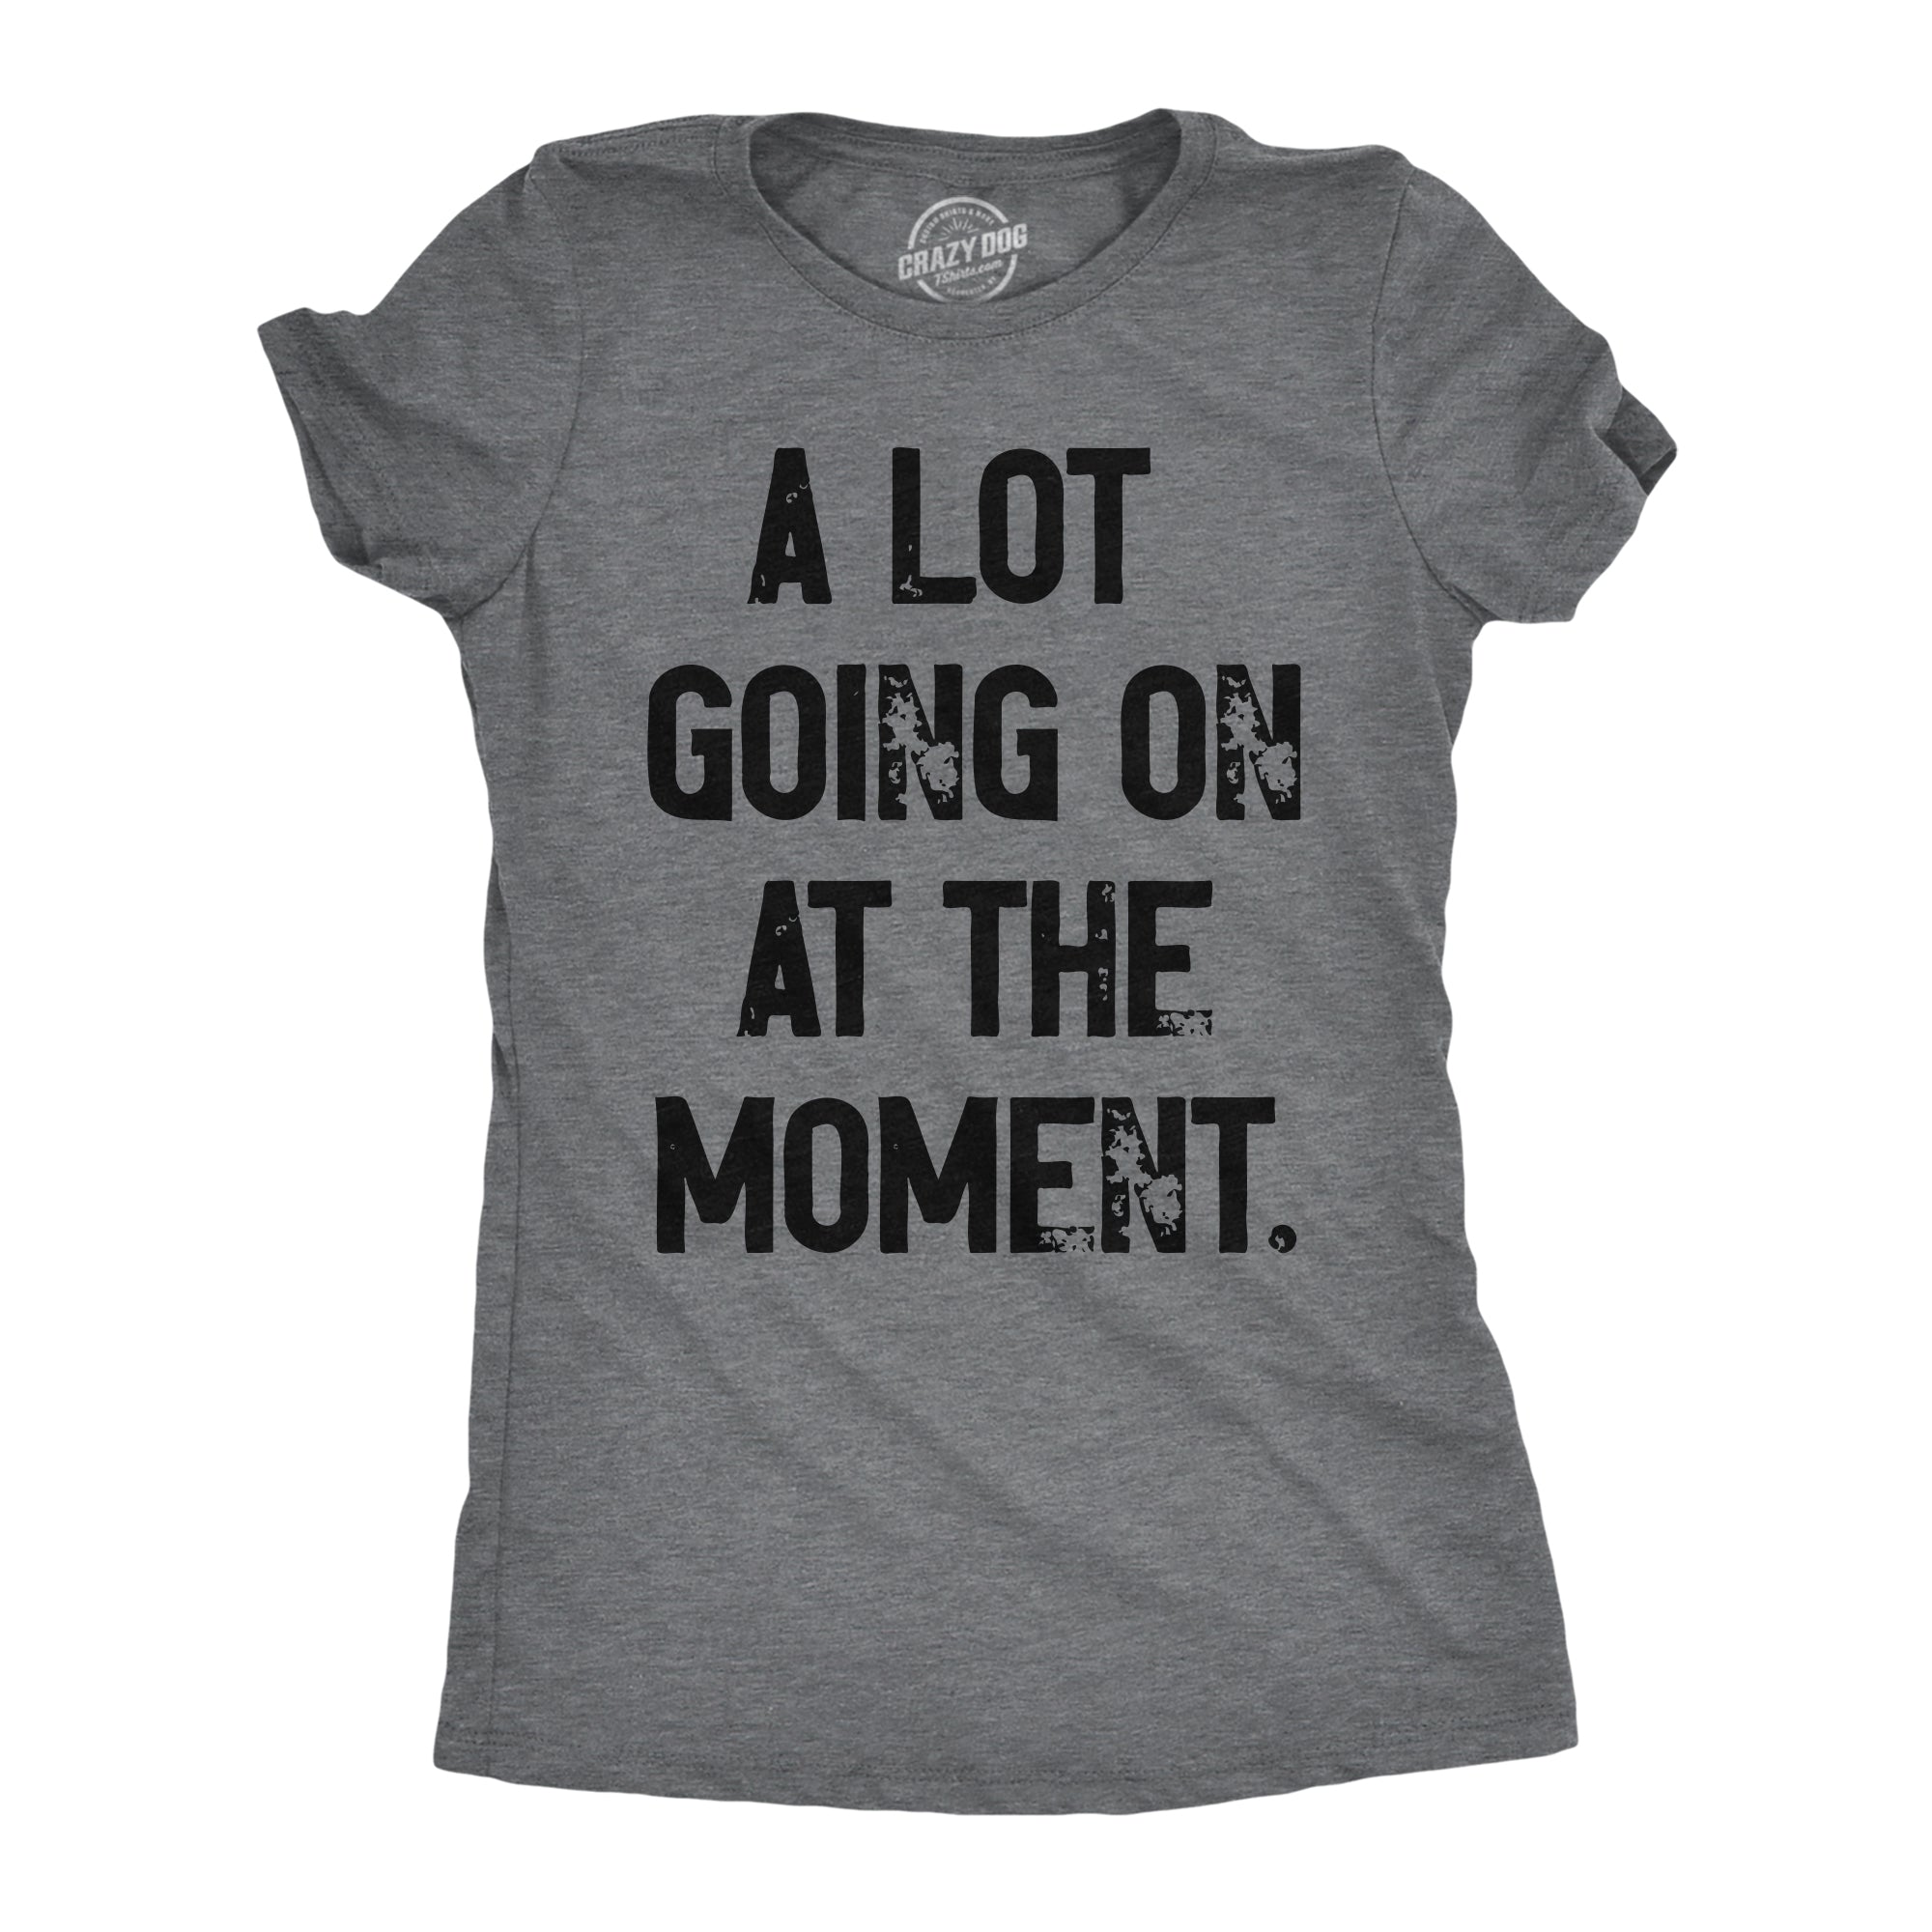 Funny Dark Heather Grey - A Lot Going On A Lot Going On At The Moment Womens T Shirt Nerdy Sarcastic Tee